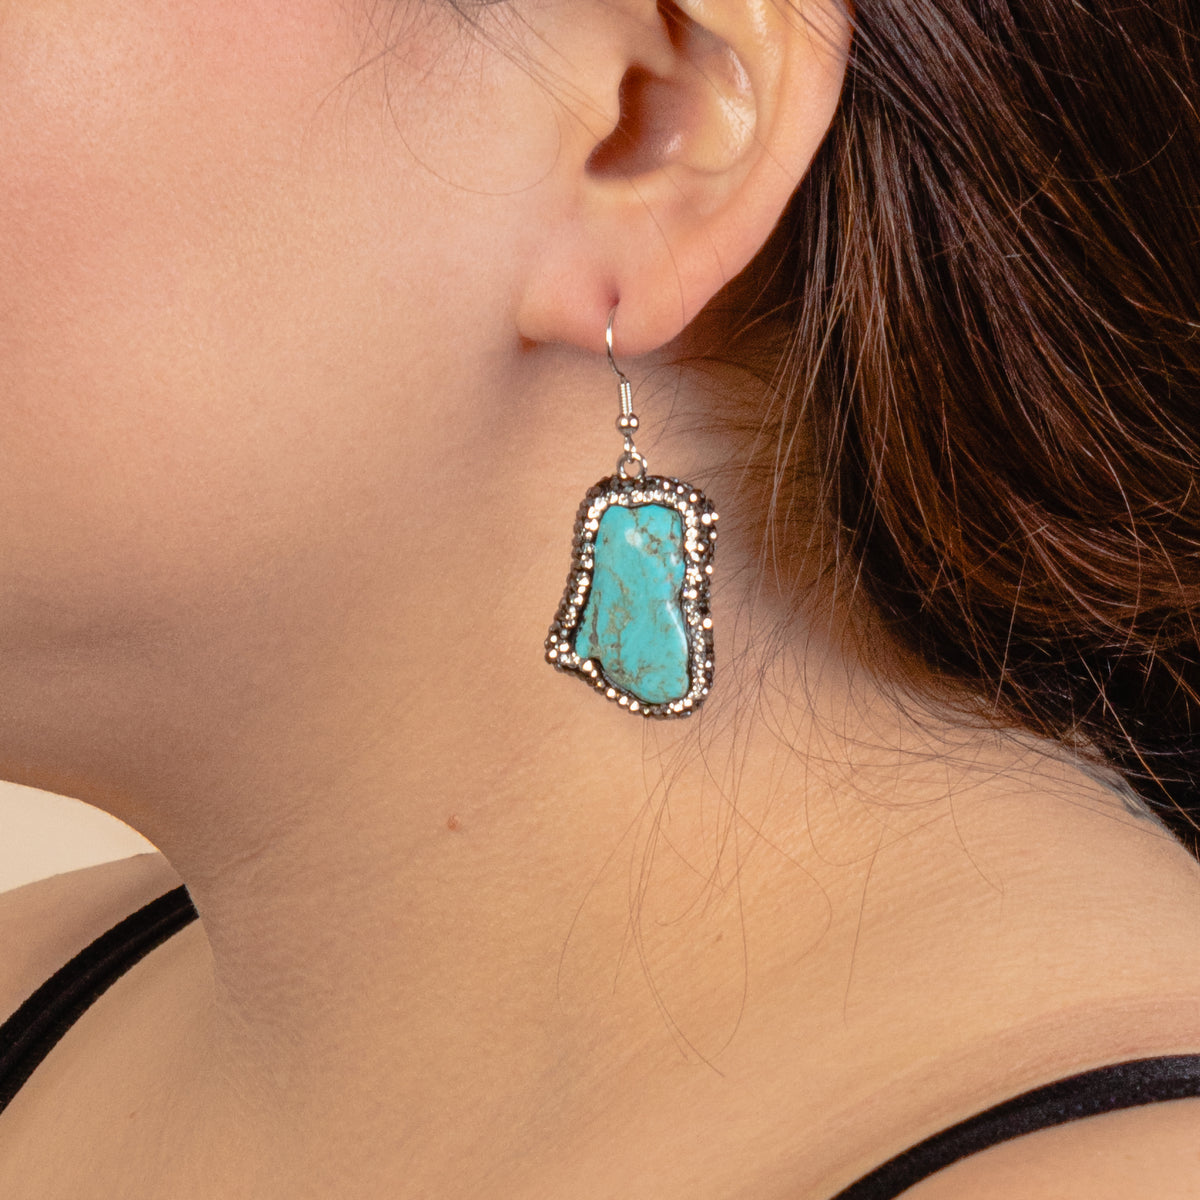 73771 - Turquoise Earrings - Turquoise & Silver